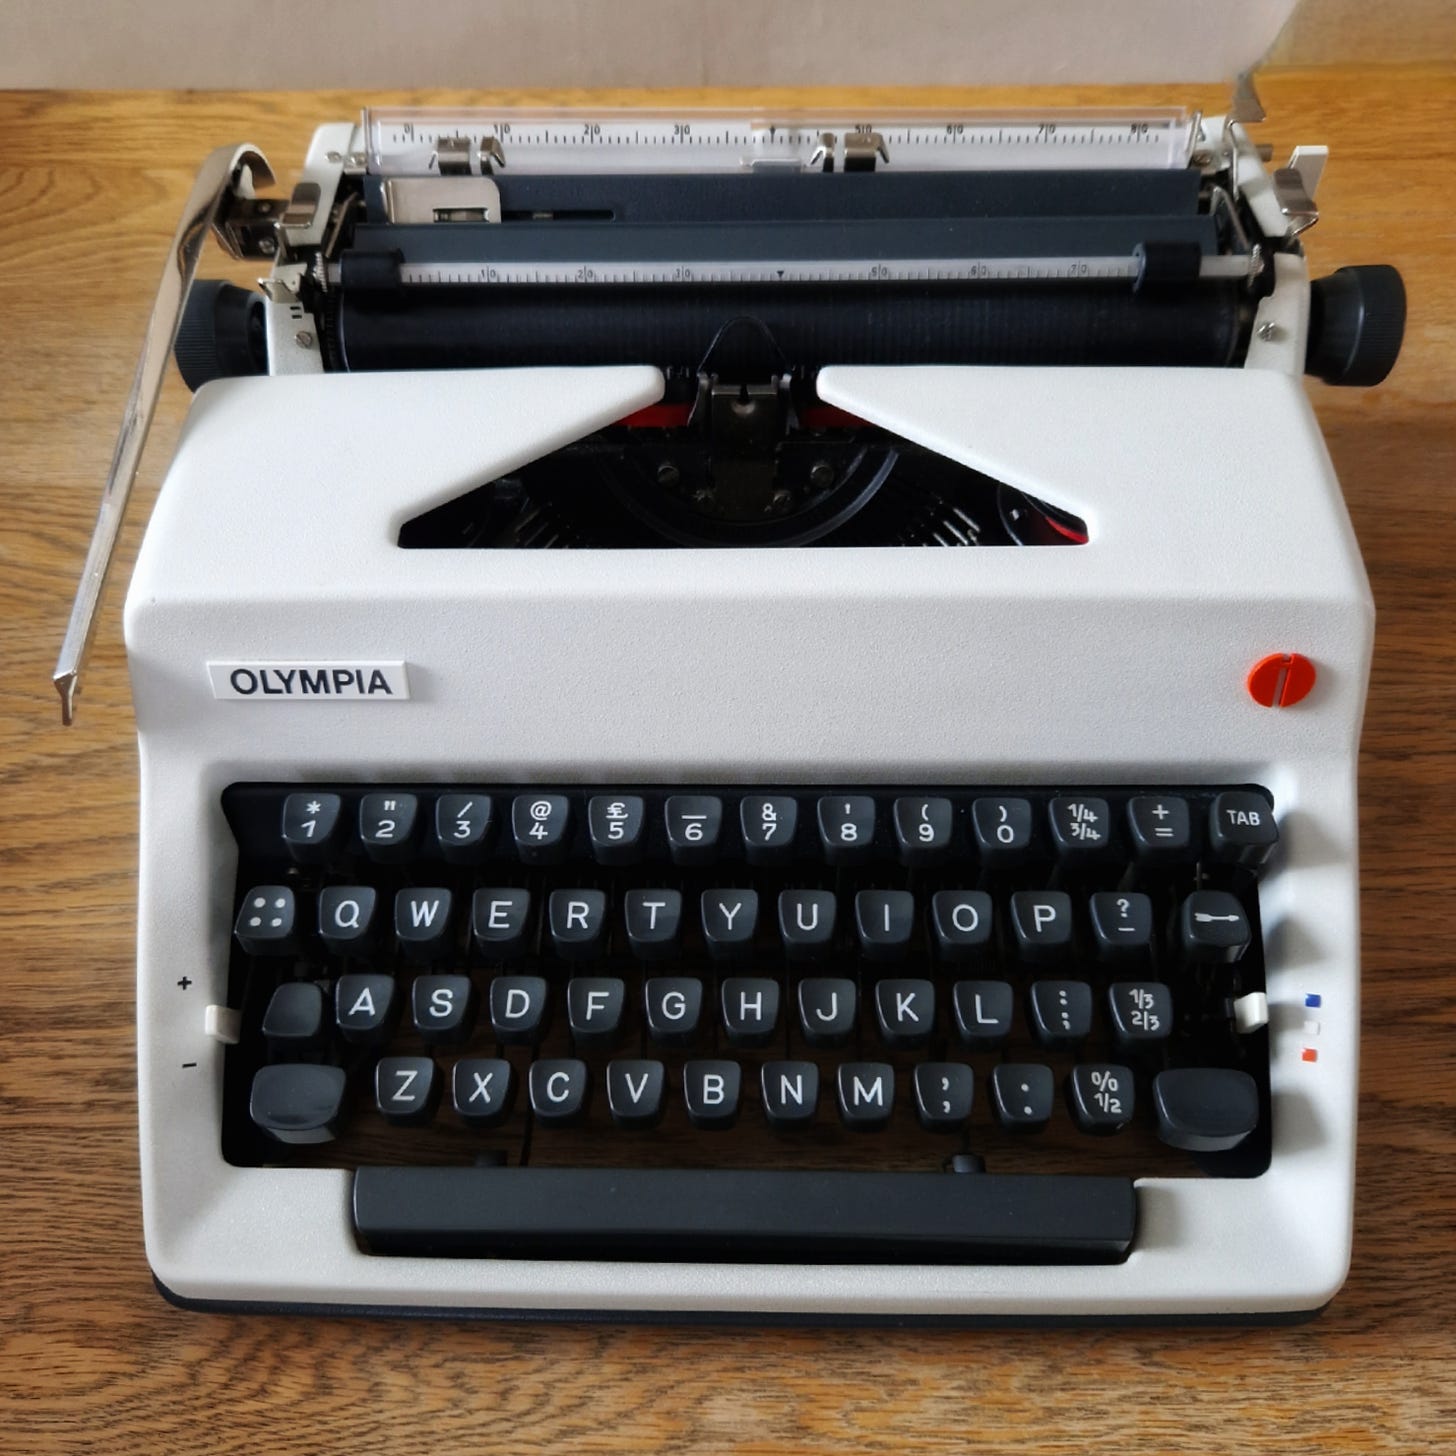 Photograph of a mid-1970s typewriter